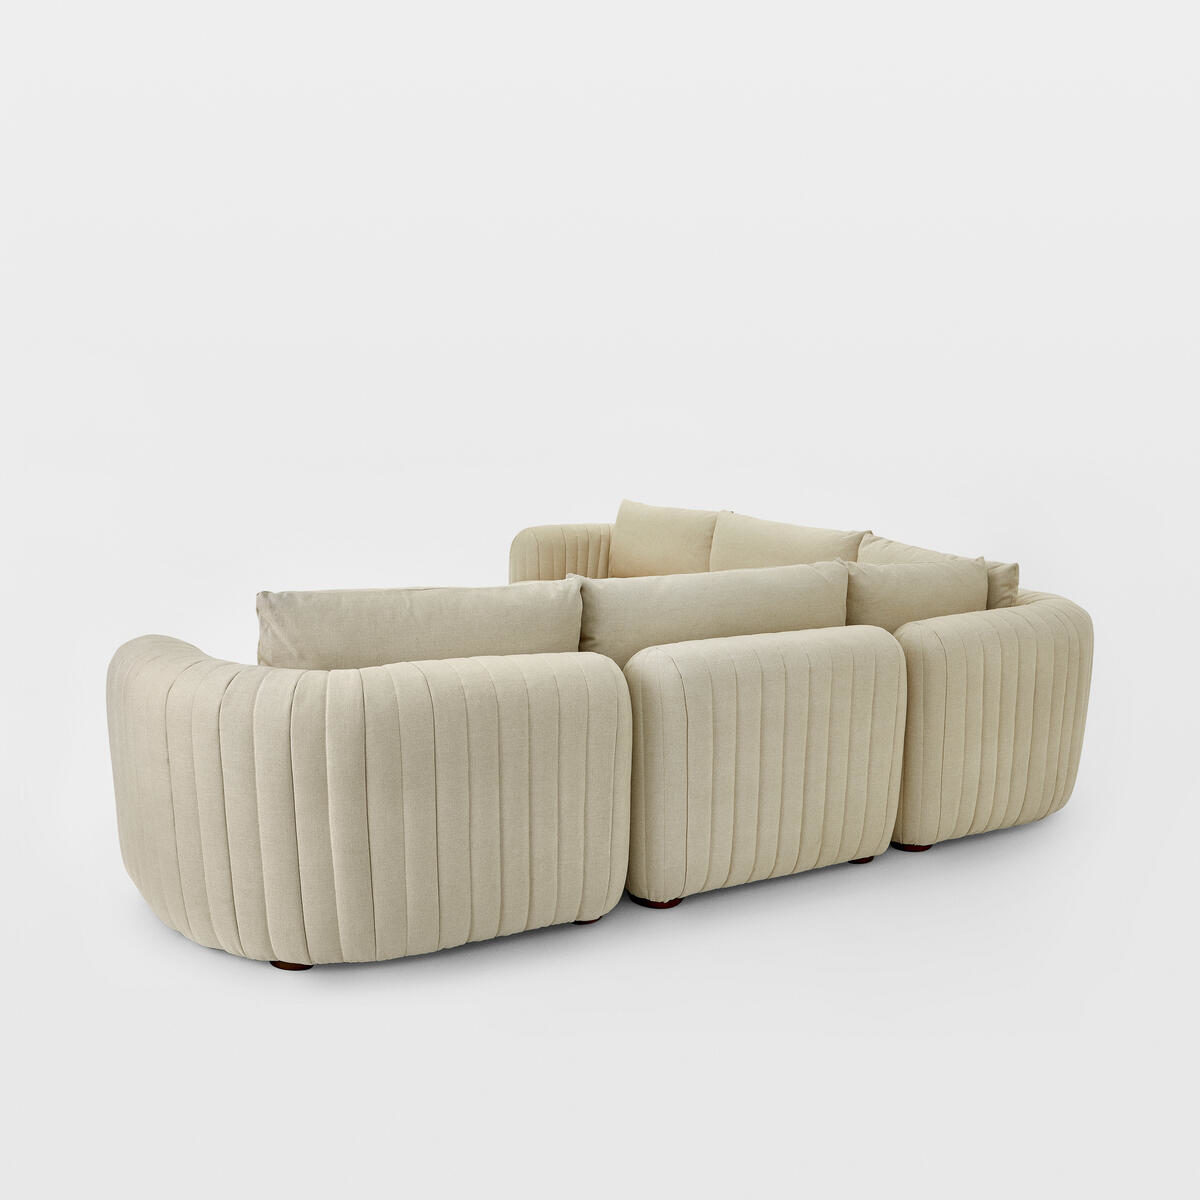 Modern Modular Corner Sofa With Tufted Curved Arms